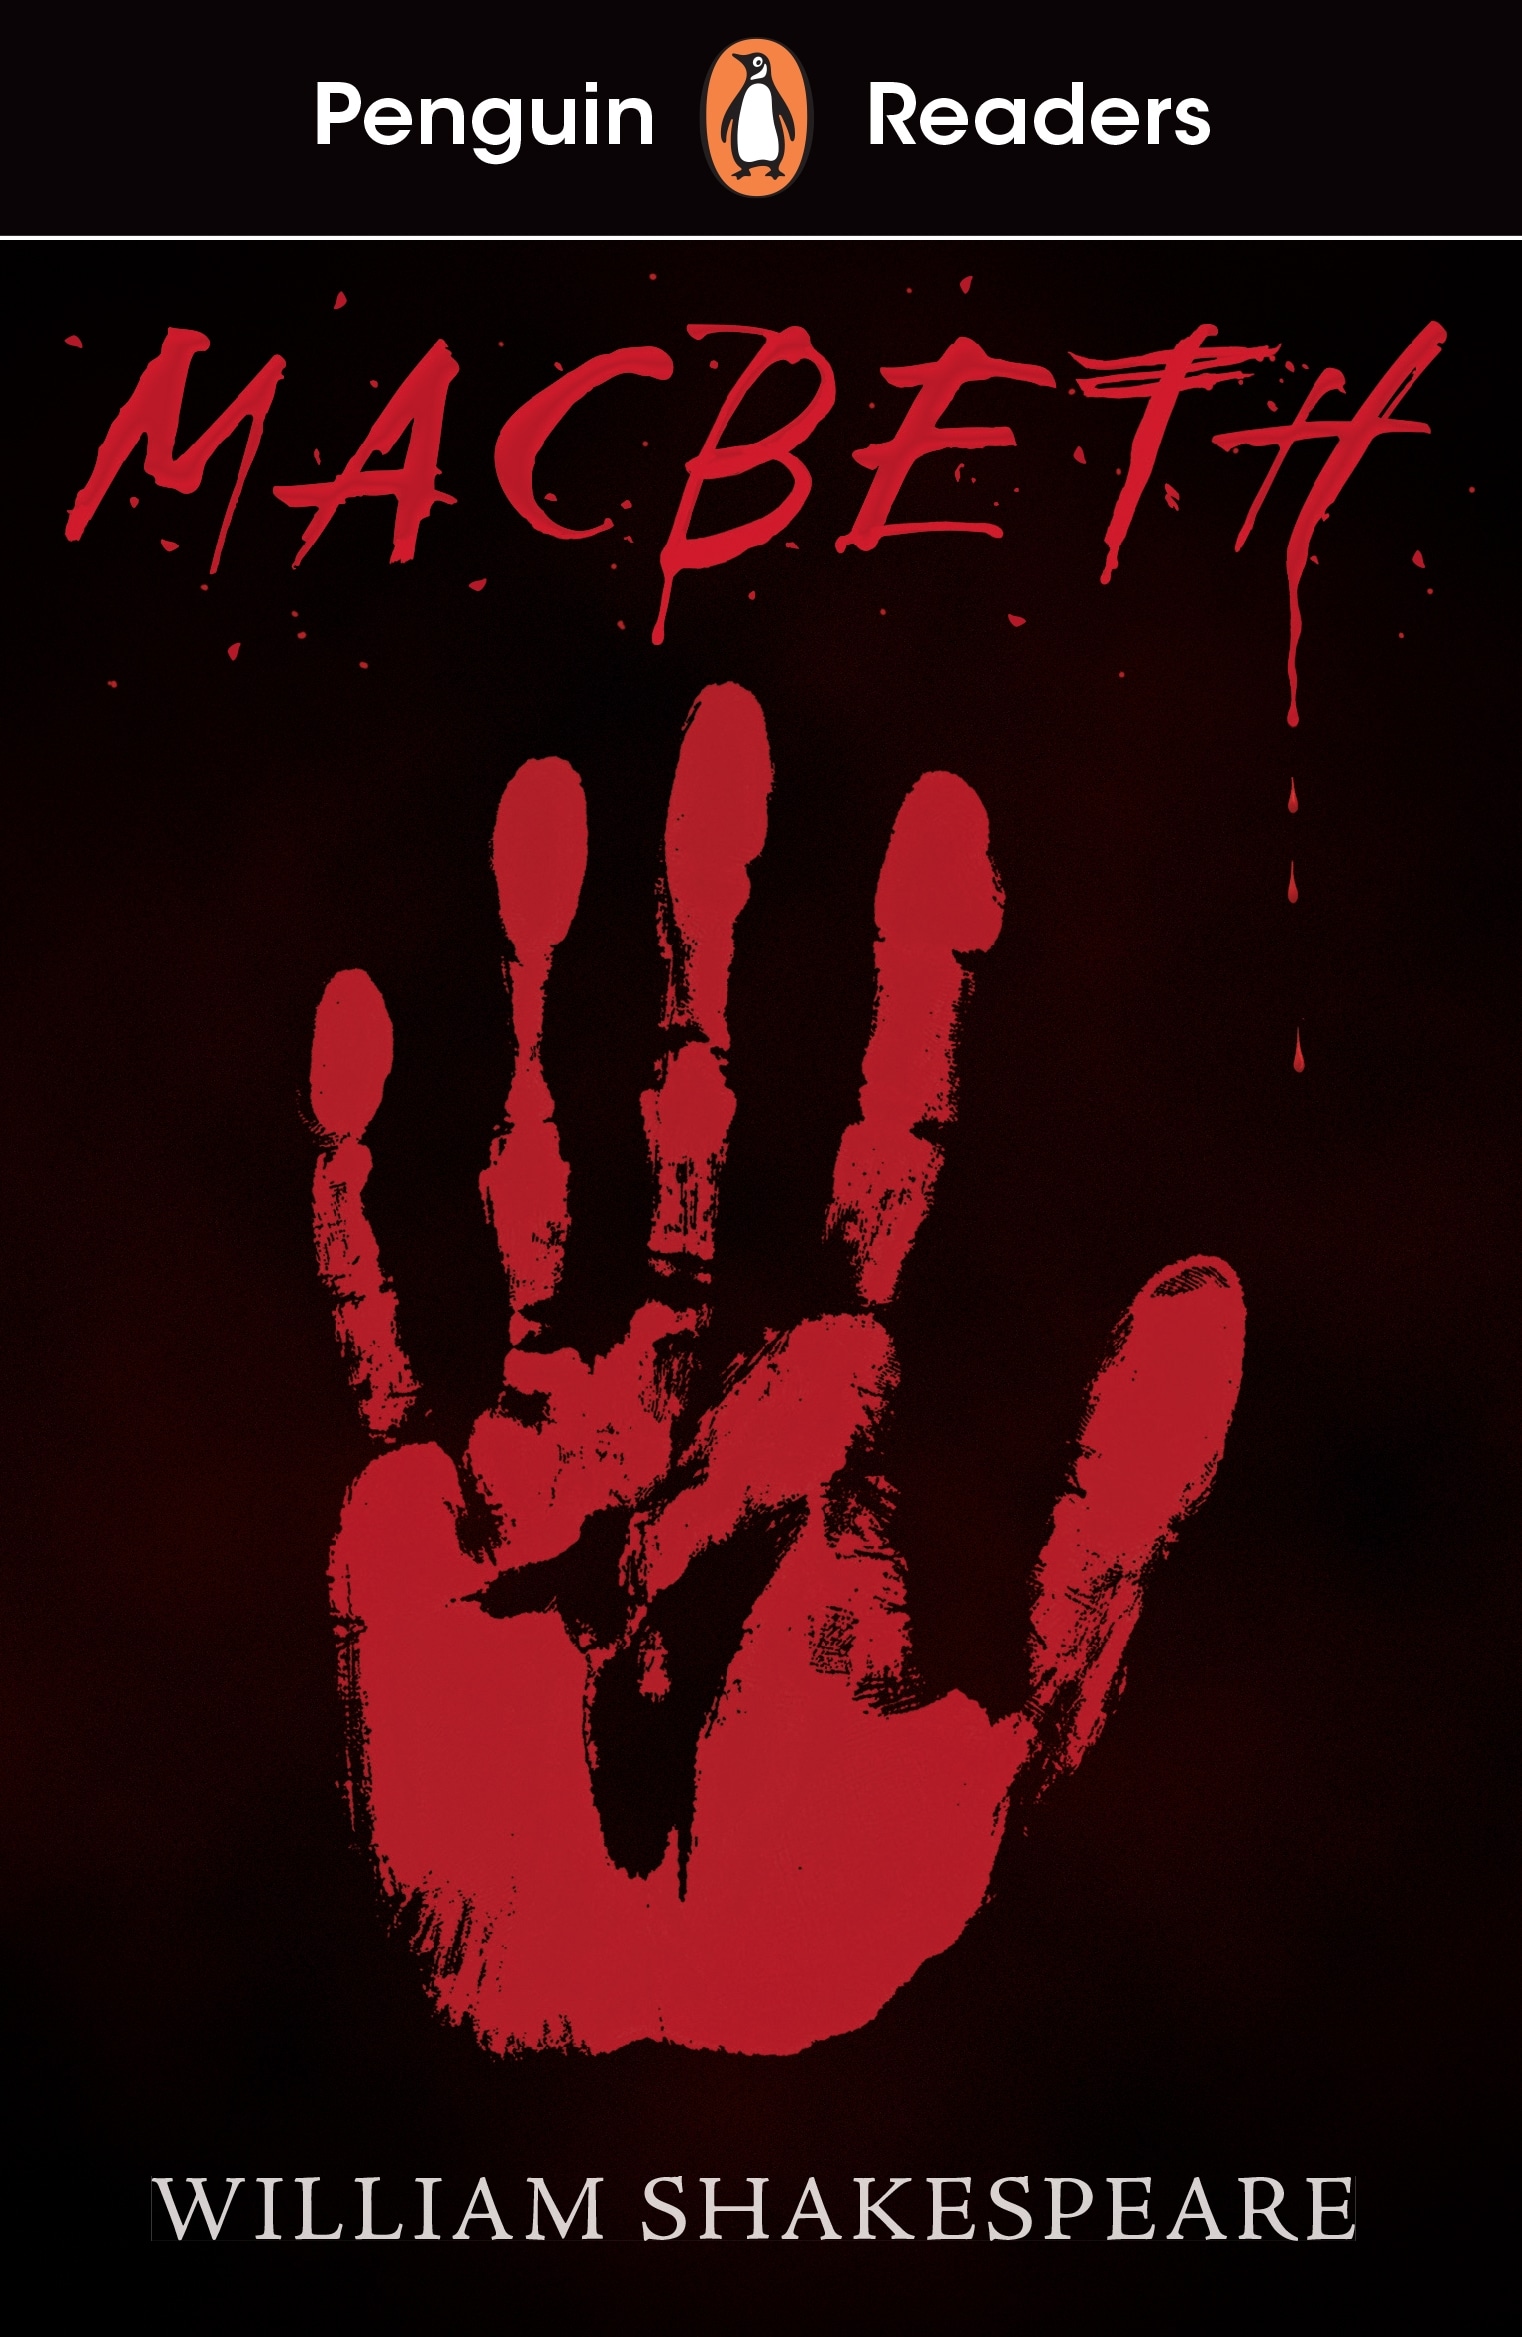 Book “Penguin Readers Level 1: Macbeth (ELT Graded Reader)” by William Shakespeare — May 6, 2021